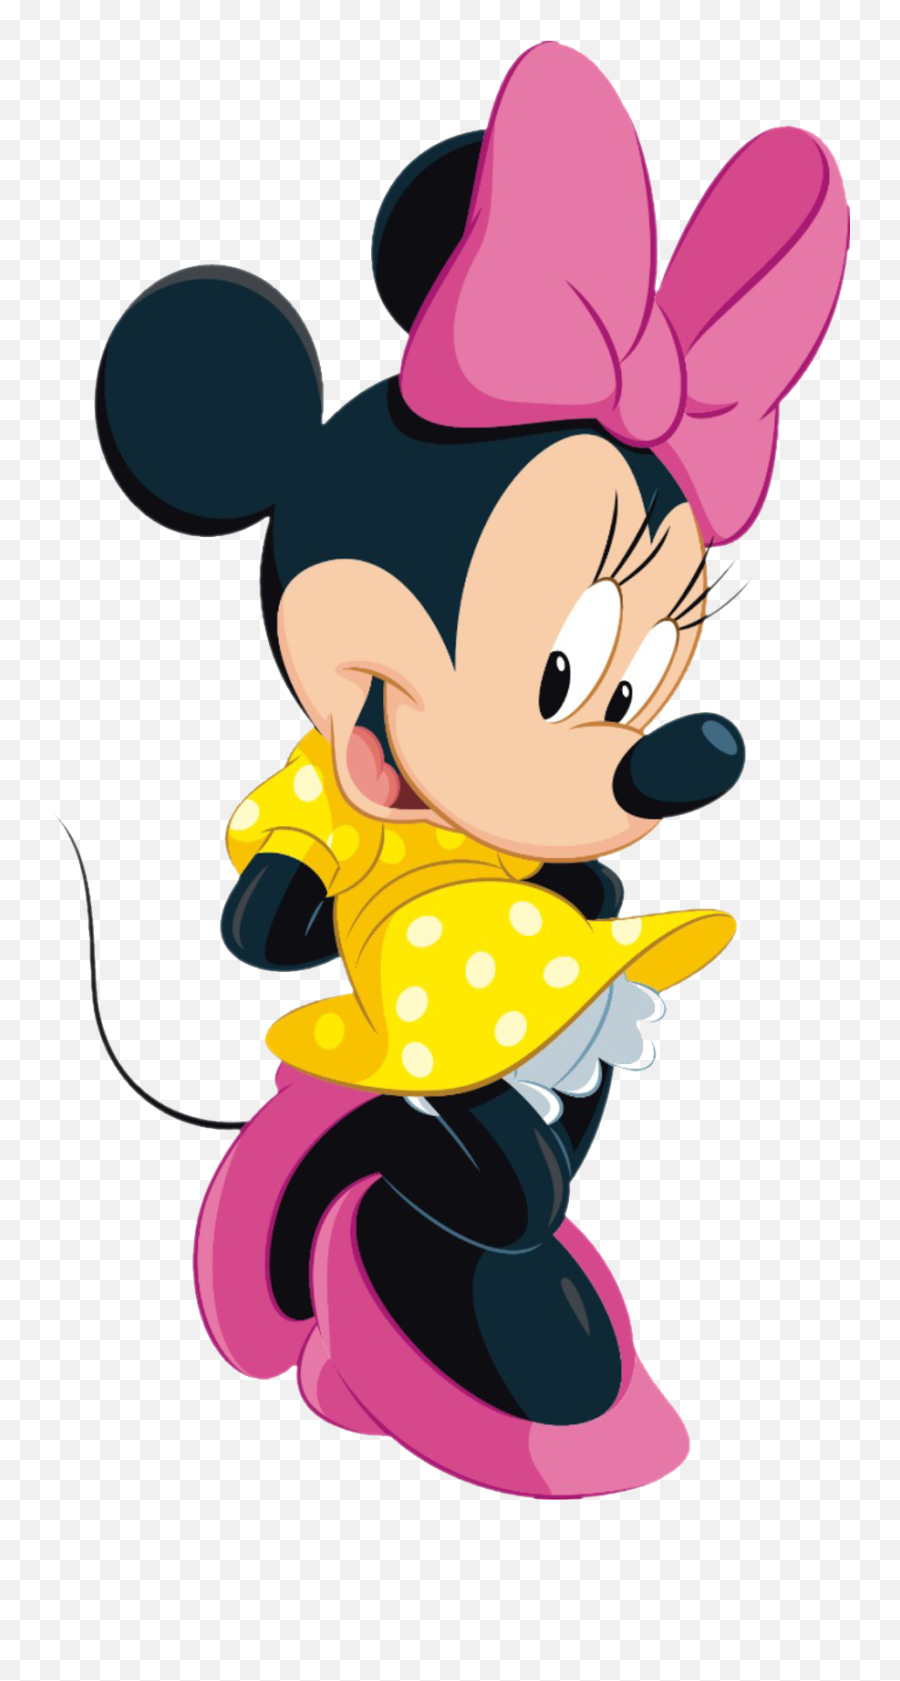 Minnie Mouse Png Transparent Images - Minnie Mouse Disney Characters,Mickey Mouse Png Images